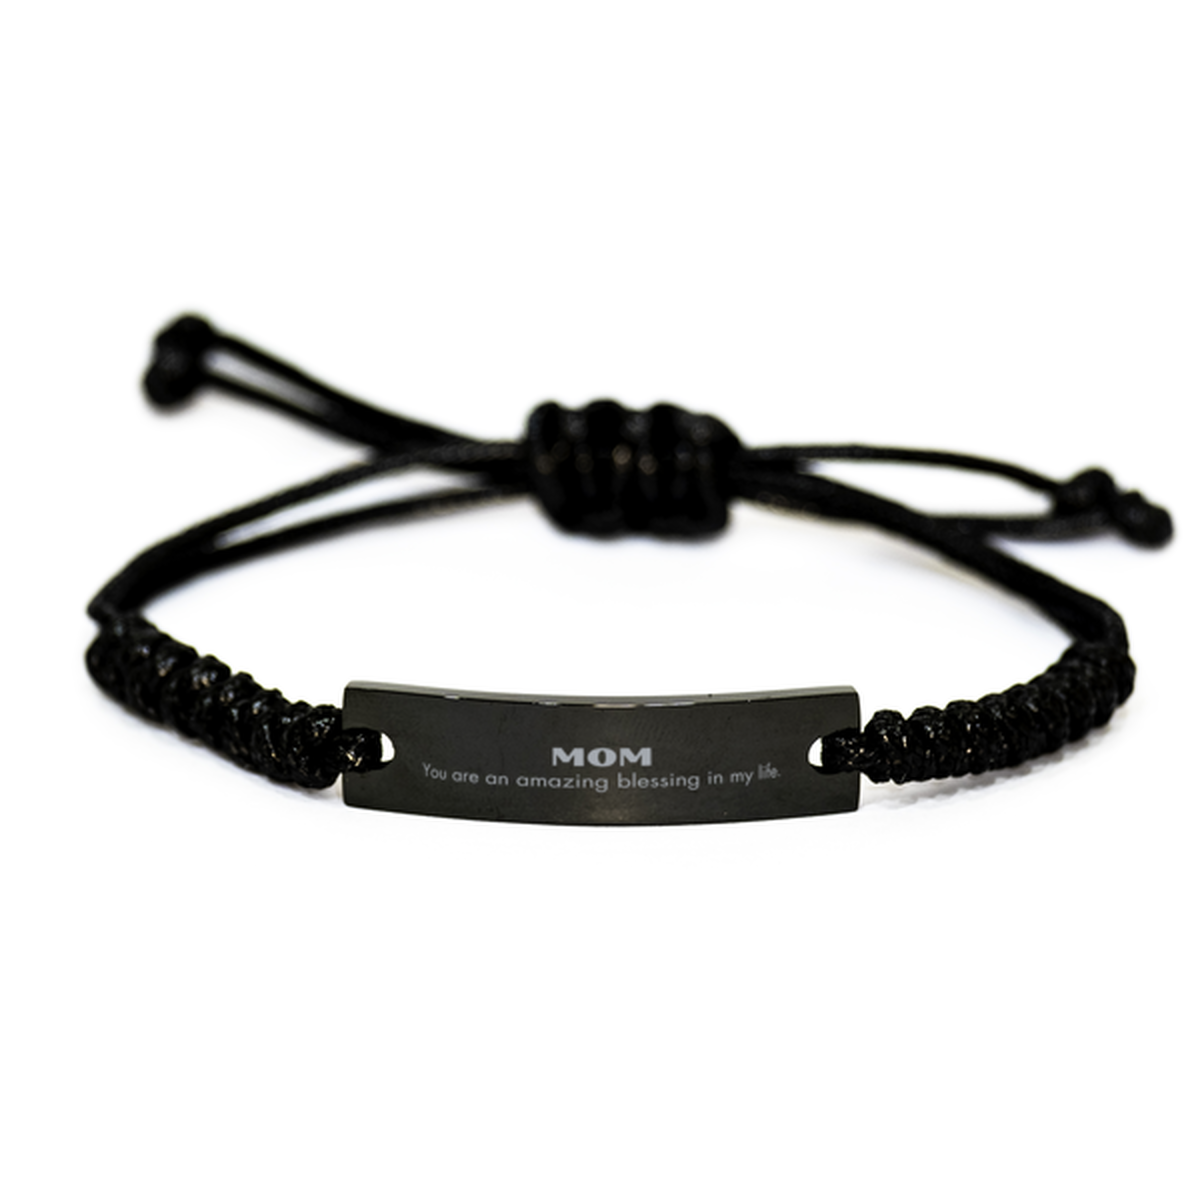 Mom Black Rope Bracelet, You are an amazing blessing in my life, Thank You Gifts For Mom, Inspirational Birthday Christmas Unique Gifts For Mom